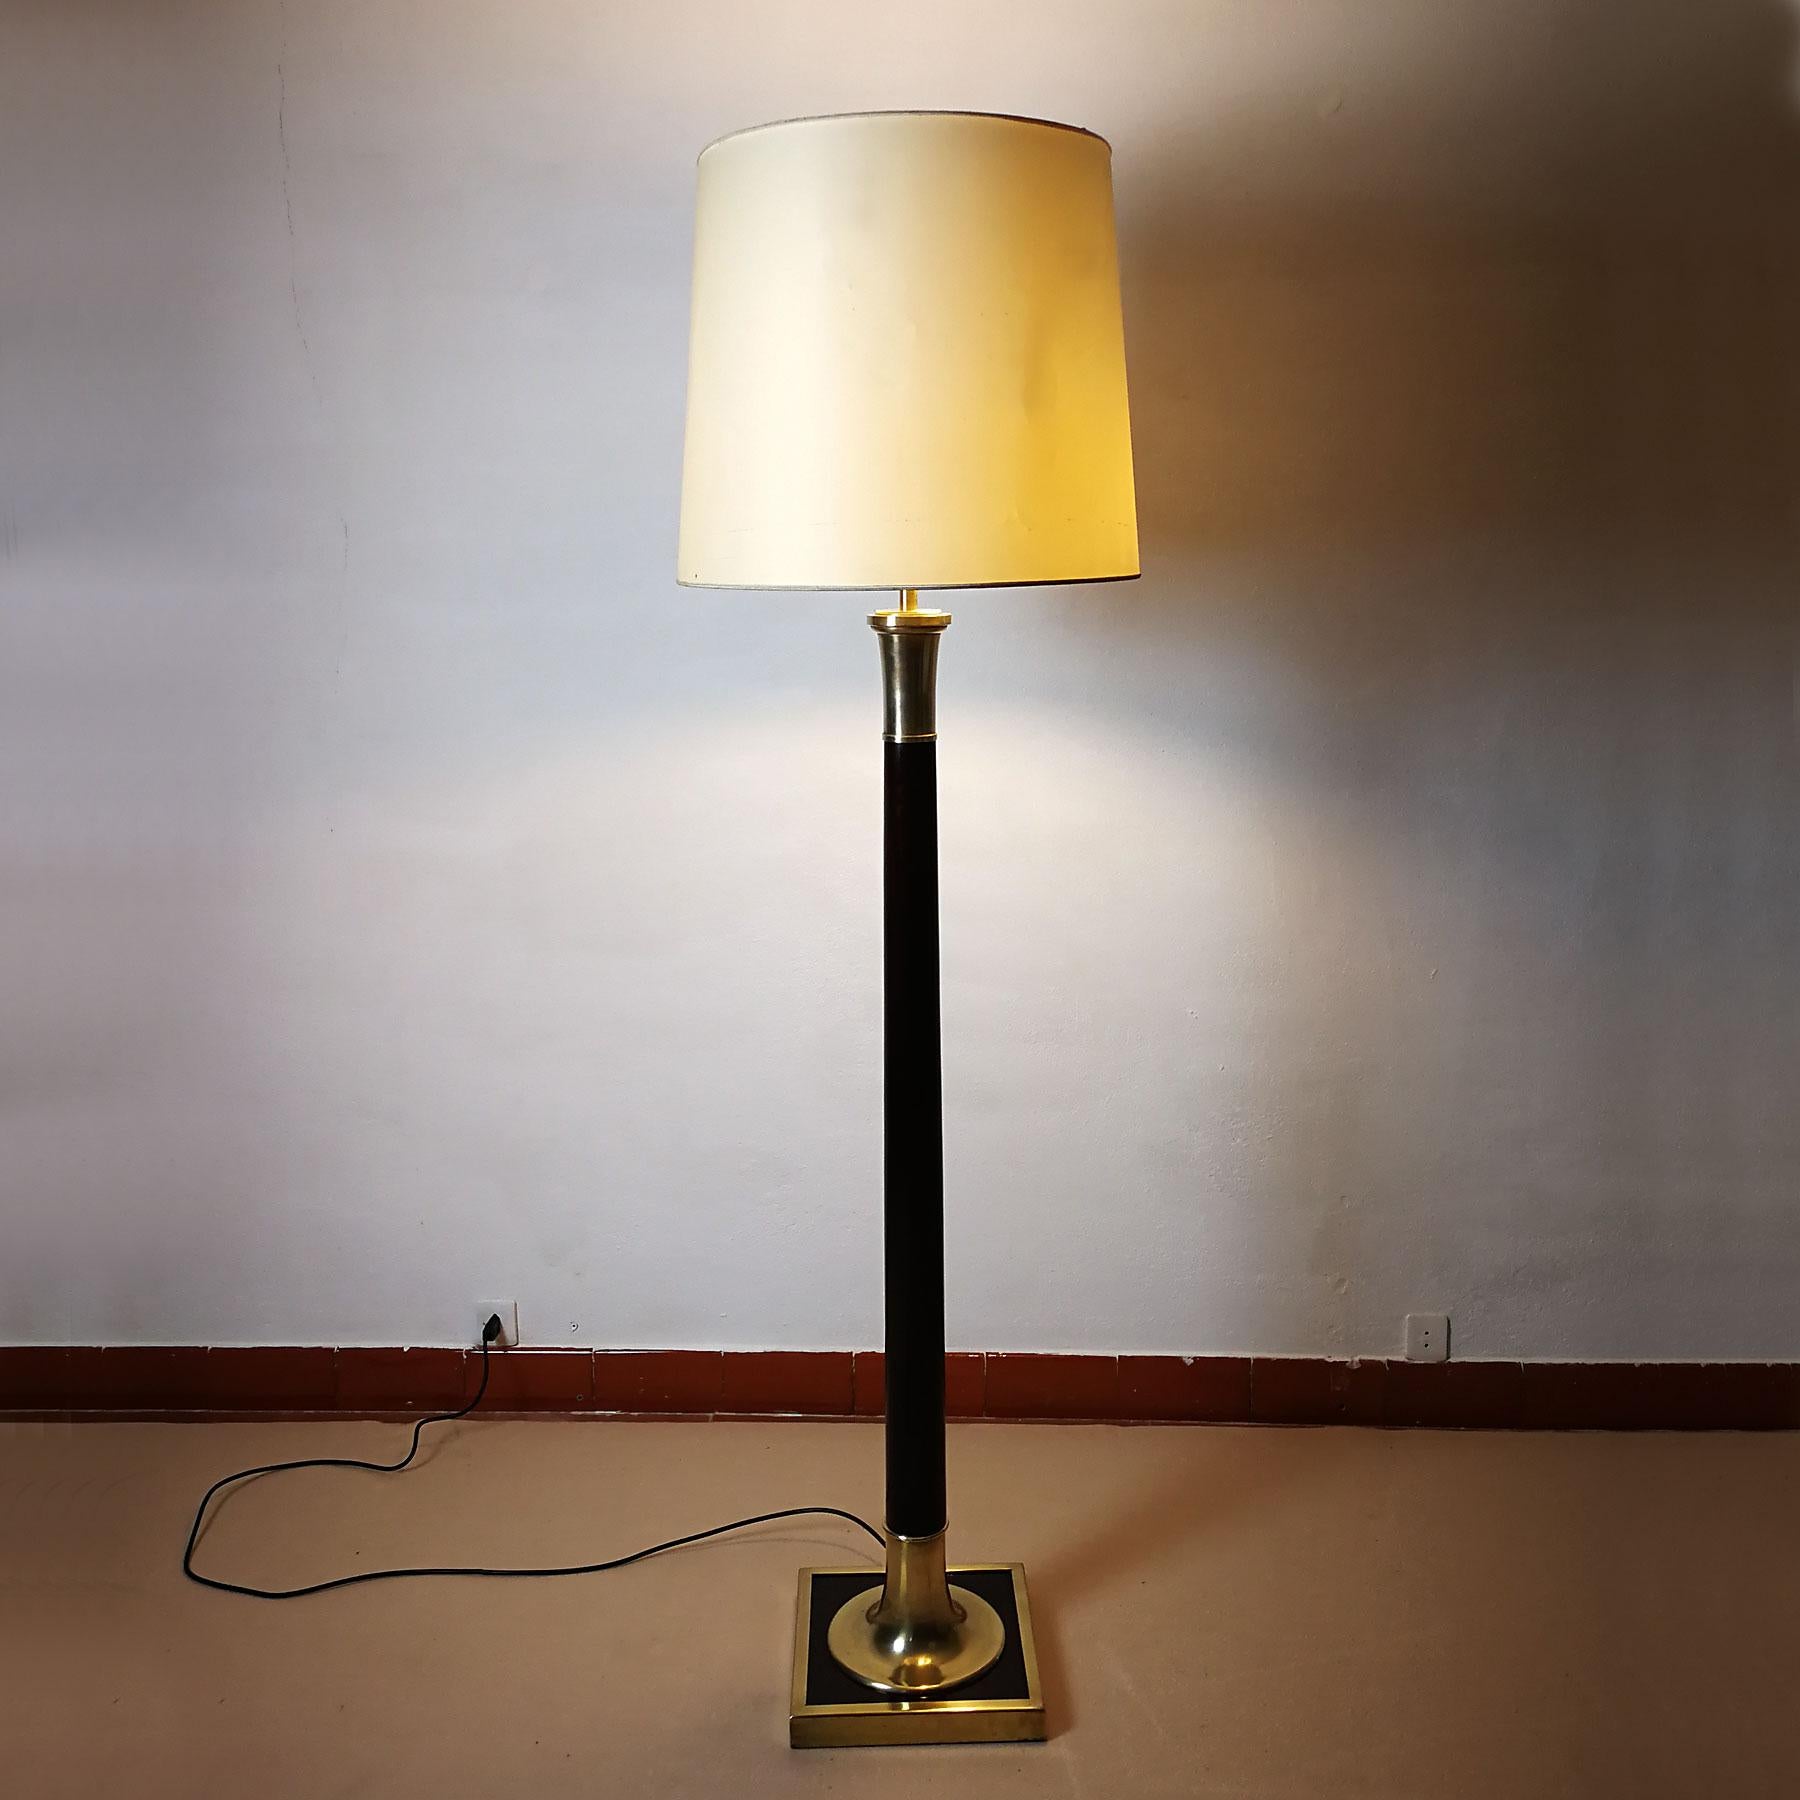 Mid-Century Modern Standing Lamp by Metalarte in Solid Mahogany, Brass - Spain For Sale 3